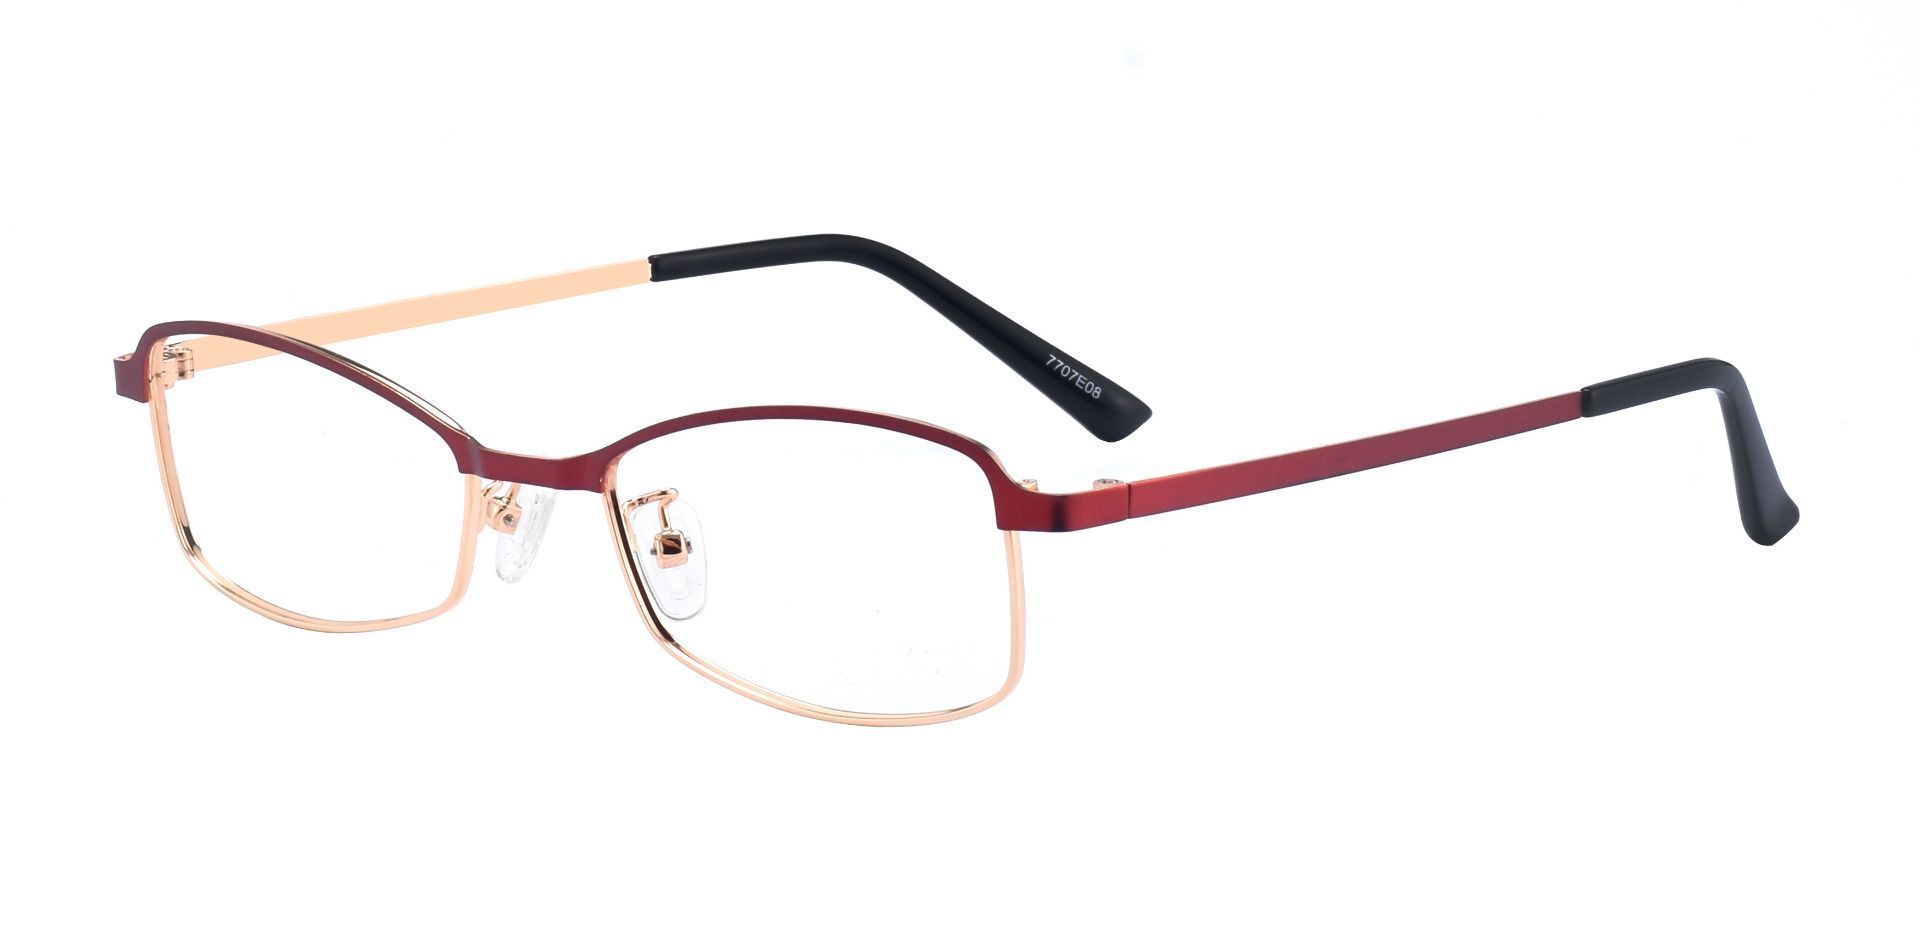 Shelby Rectangle Single Vision Glasses - Red